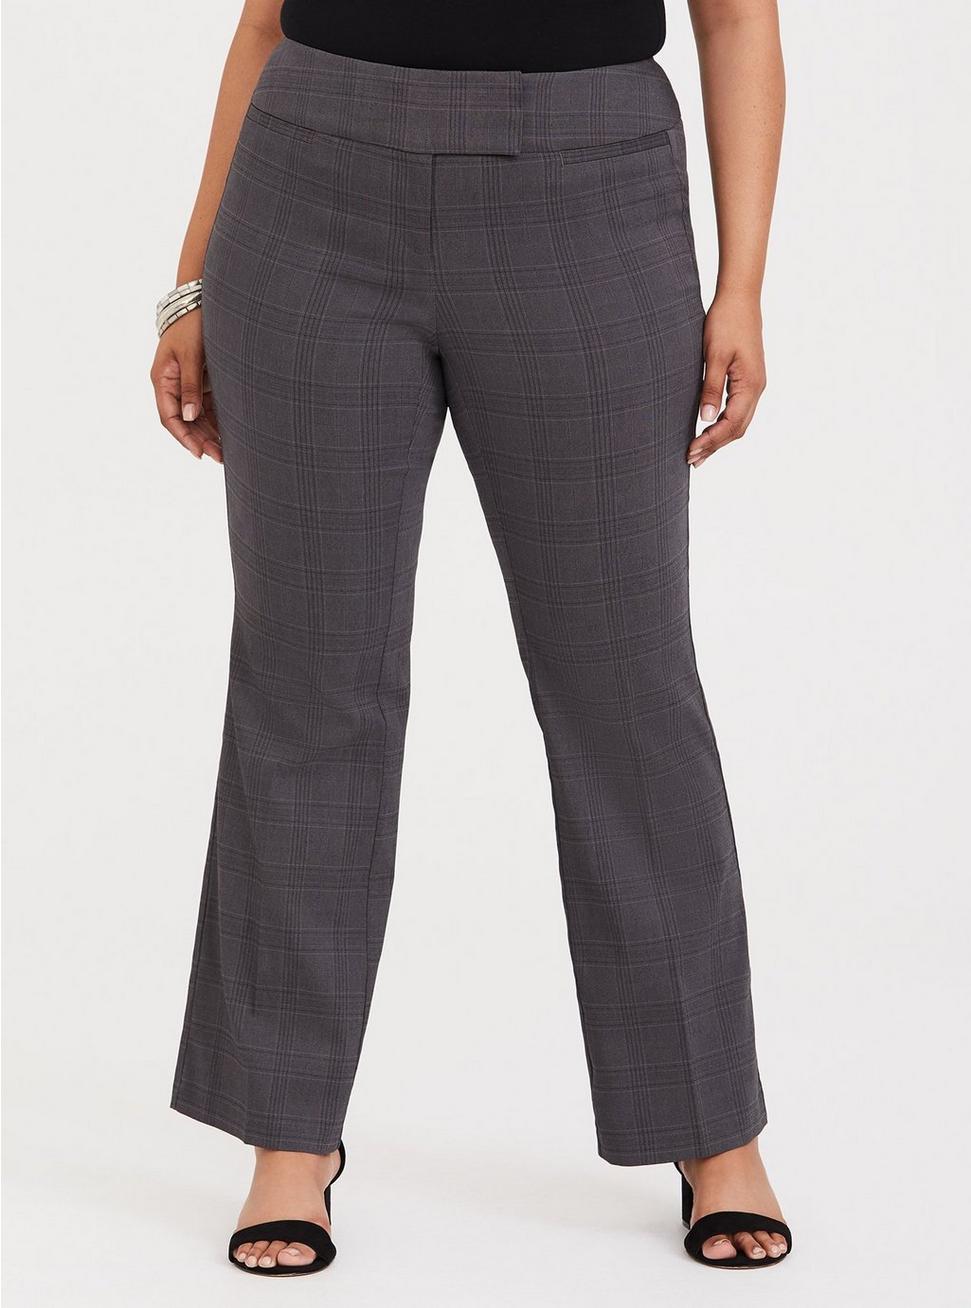 Plus Size - Grey Plaid Classic Millennium Stretch High Rise Relaxed ...